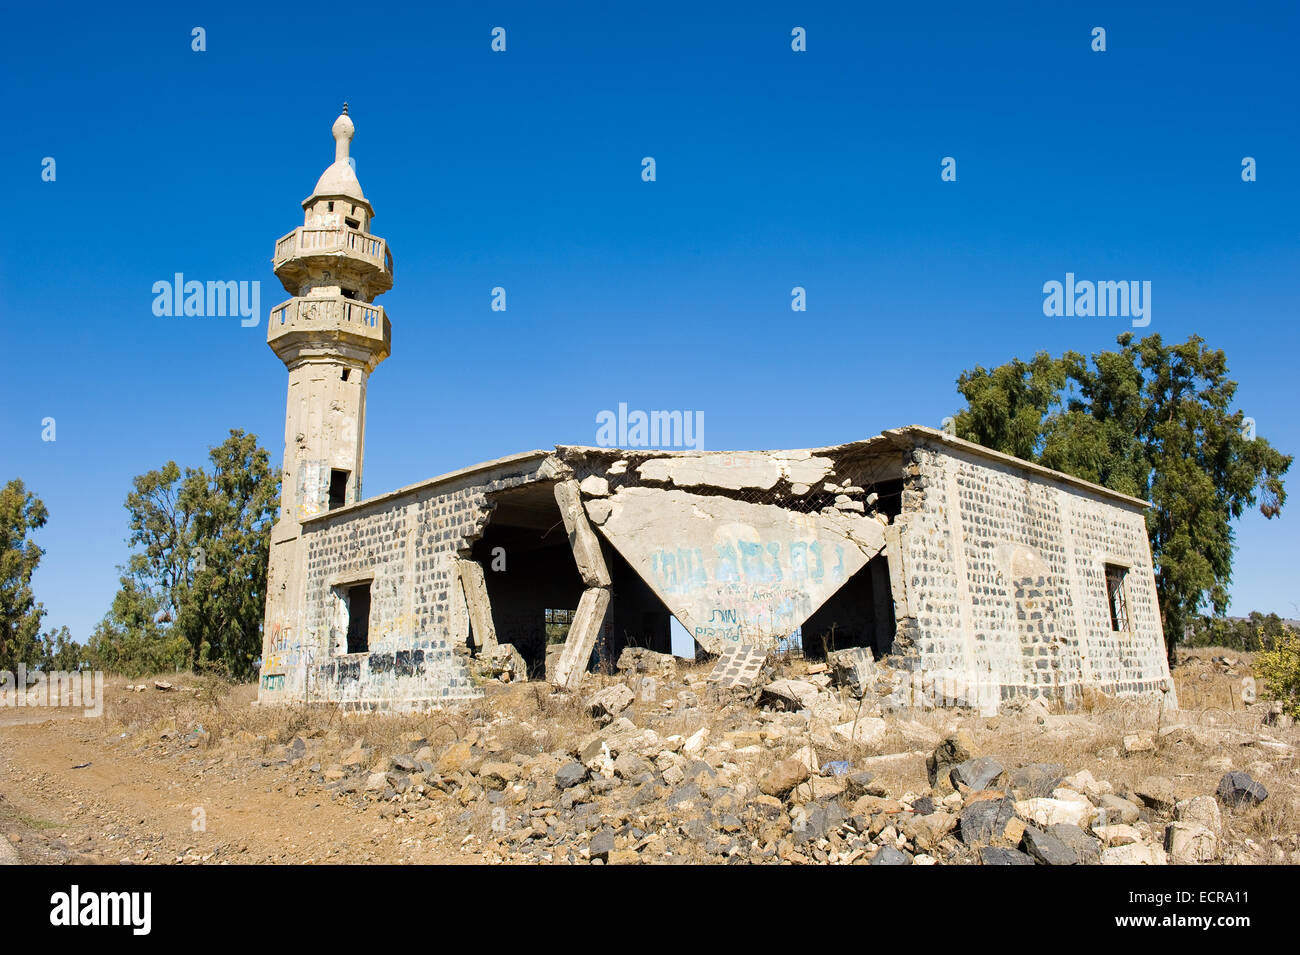 Remains of a mosque destroyed in the yom kippur war on the Golan Heights in Israel Stock Photo